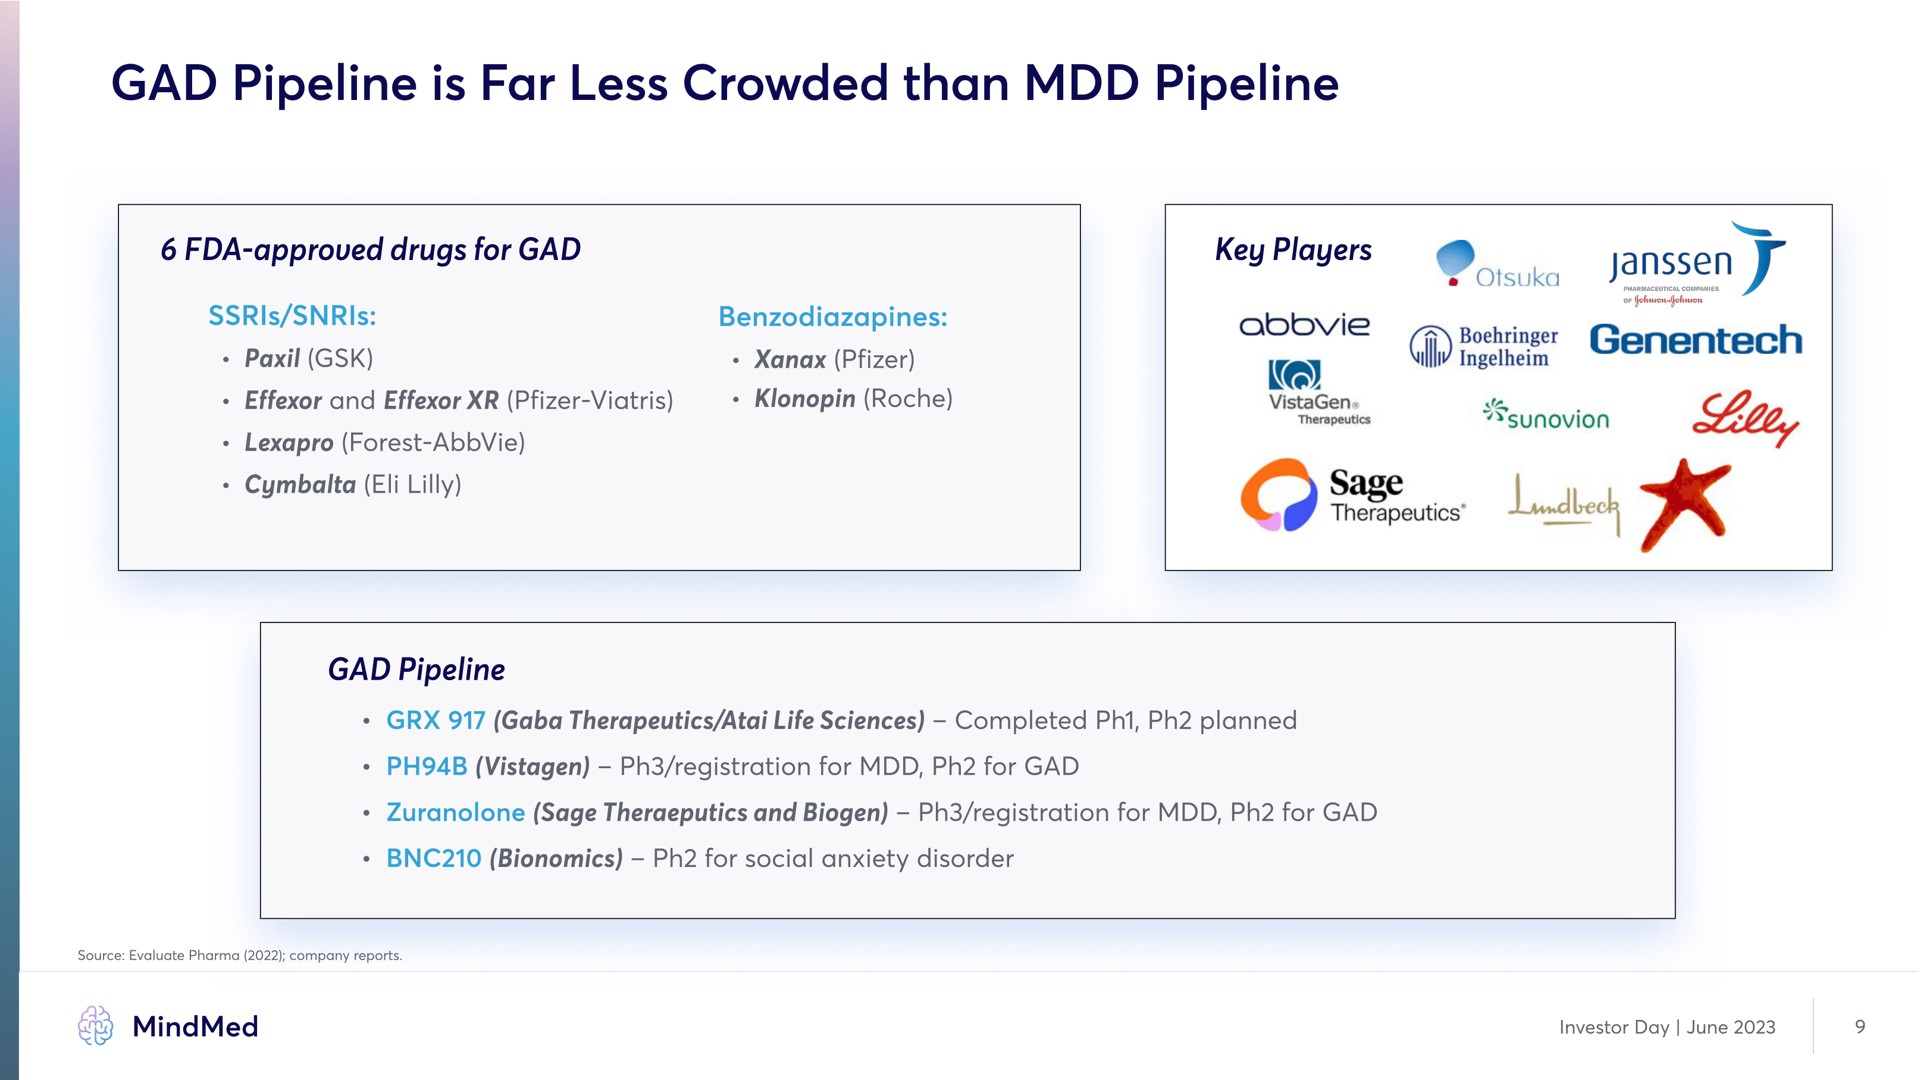 gad pipeline is far less crowded than pipeline | MindMed